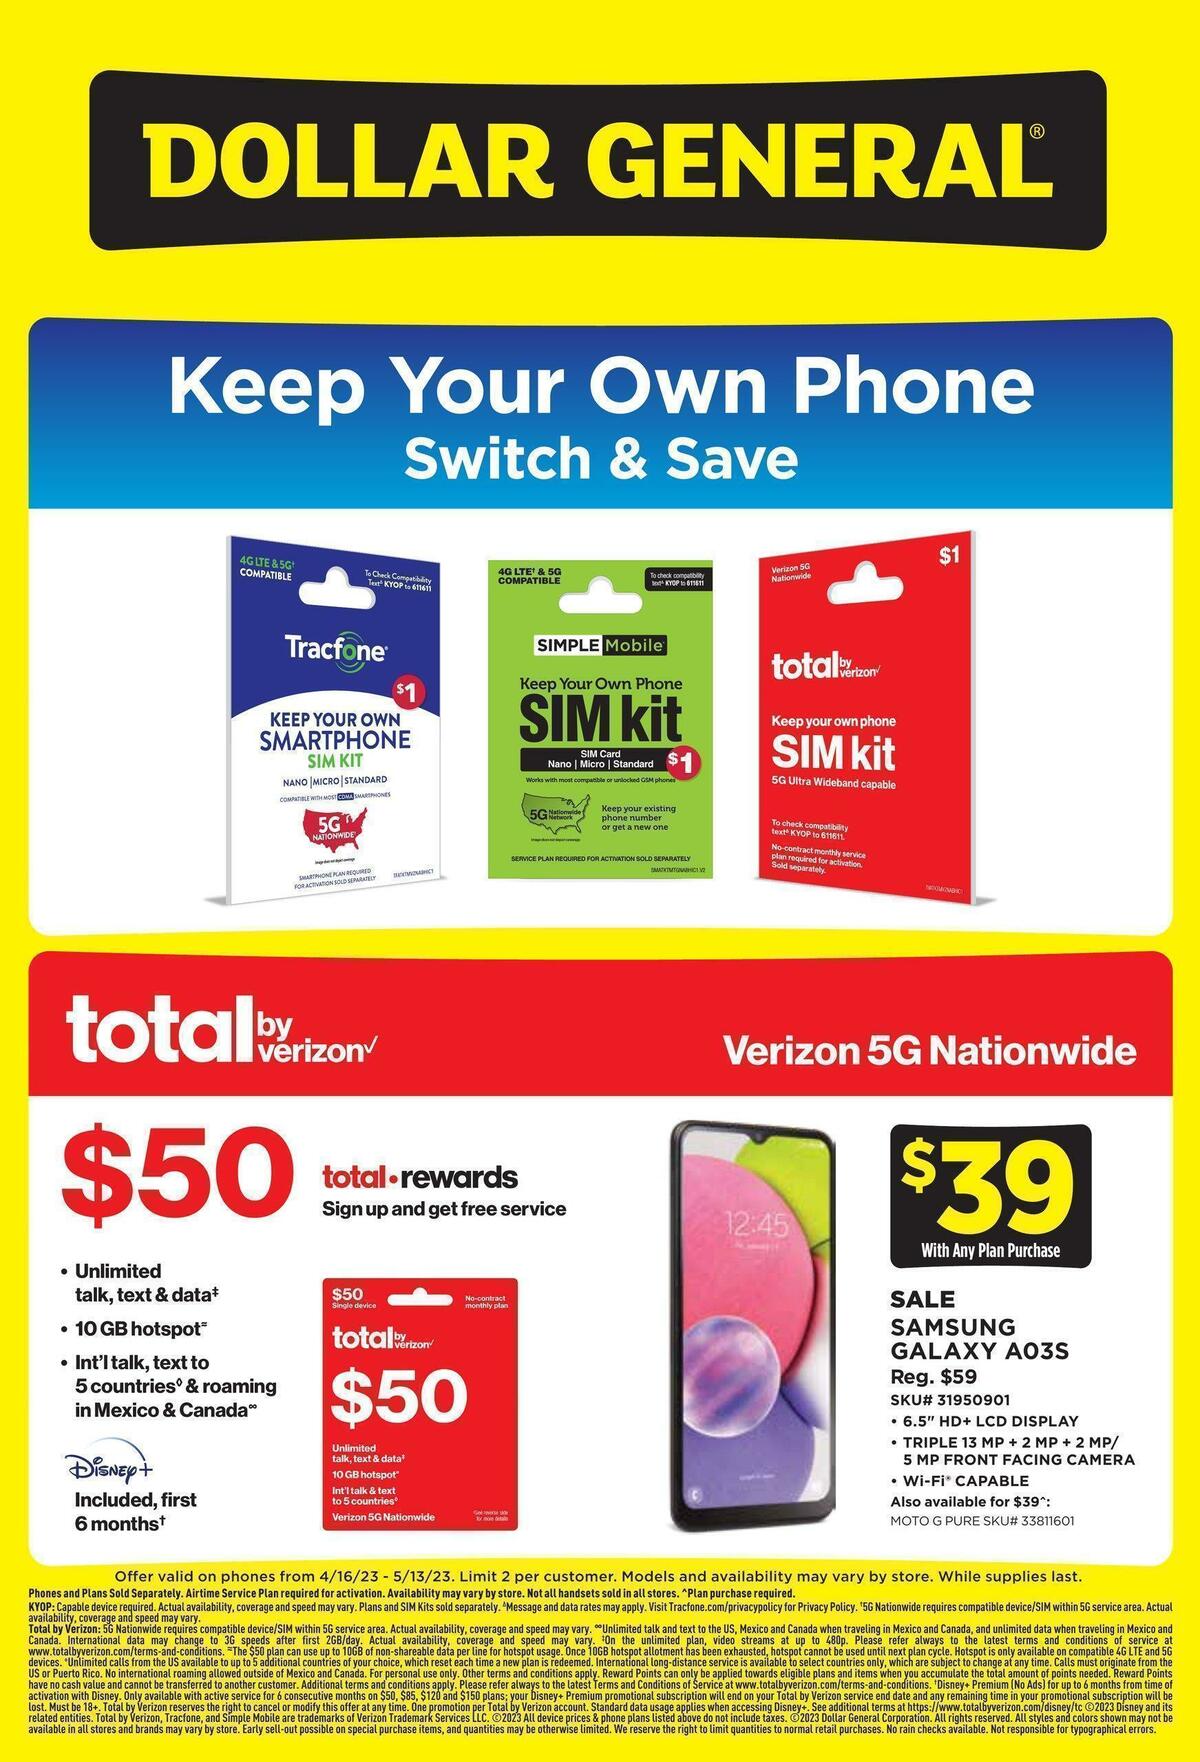 Dollar General Weekly Wireless Specials Weekly Ad from April 16